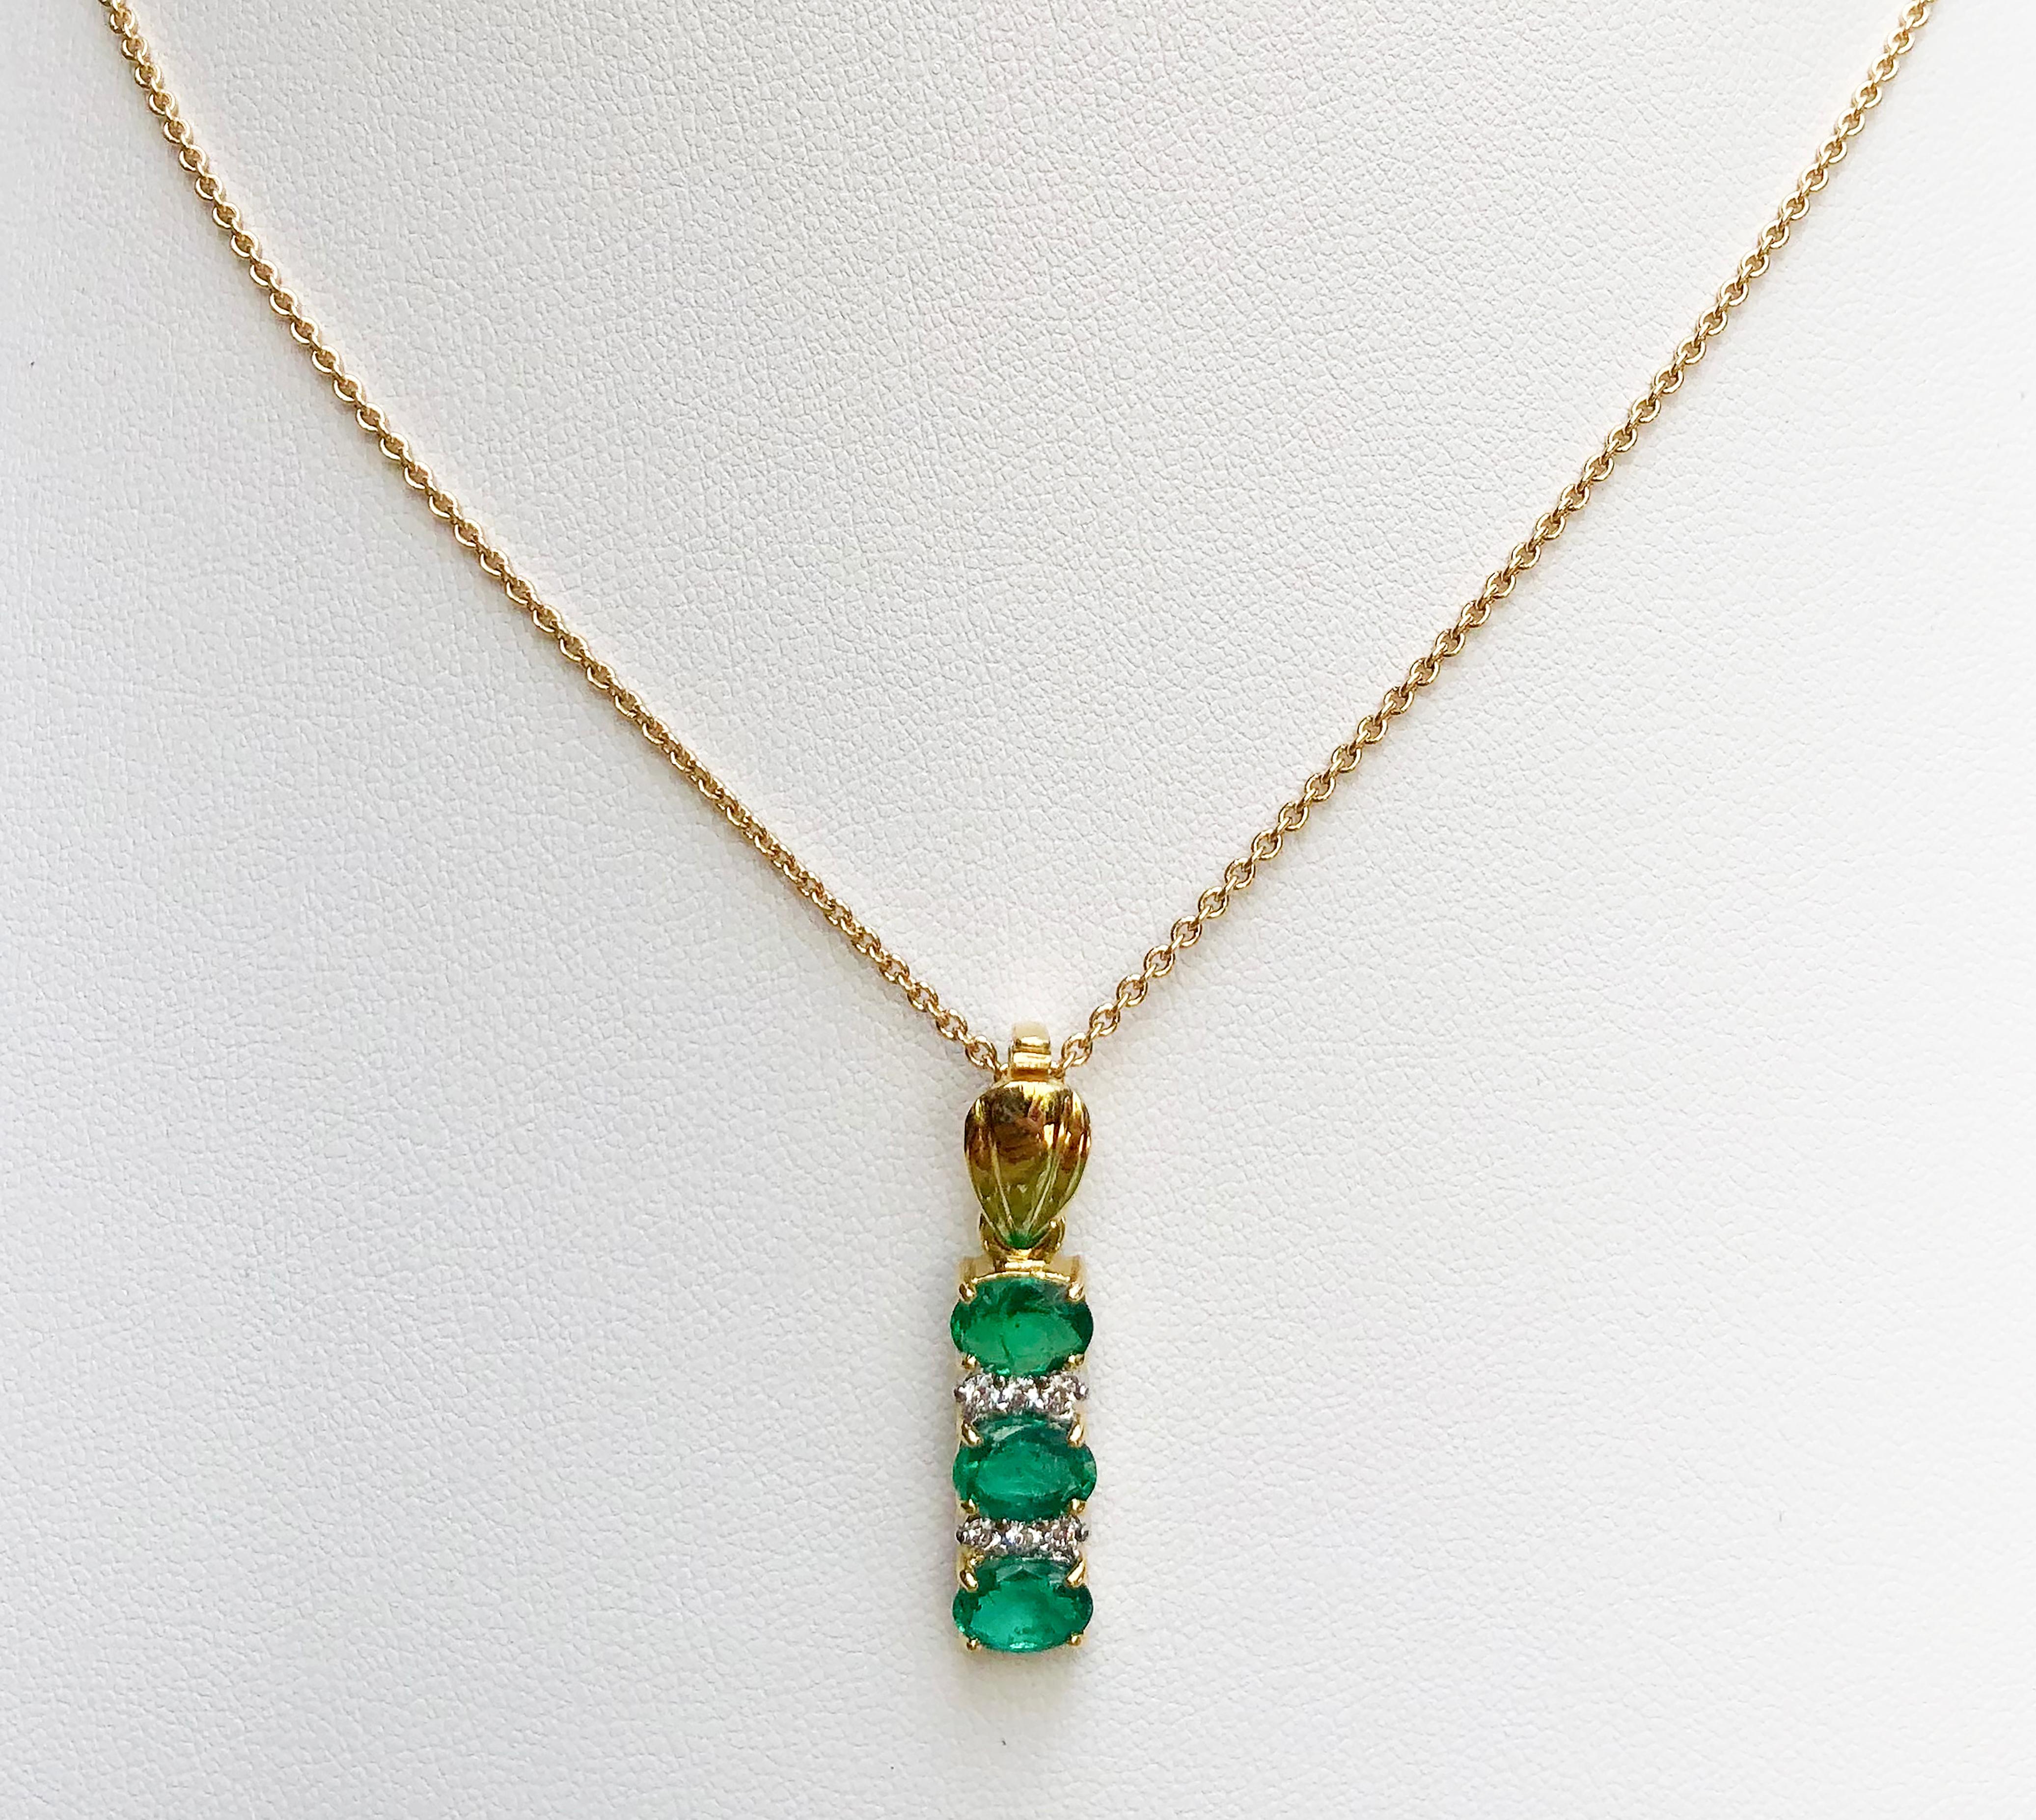 Emerald 1.84 carats with Diamond 0.13 carat Pendant set in 18 Karat Gold Settings
(chain not included)

Width:  0.6 cm 
Length: 3.0 cm
Total Weight: 4.6 grams

